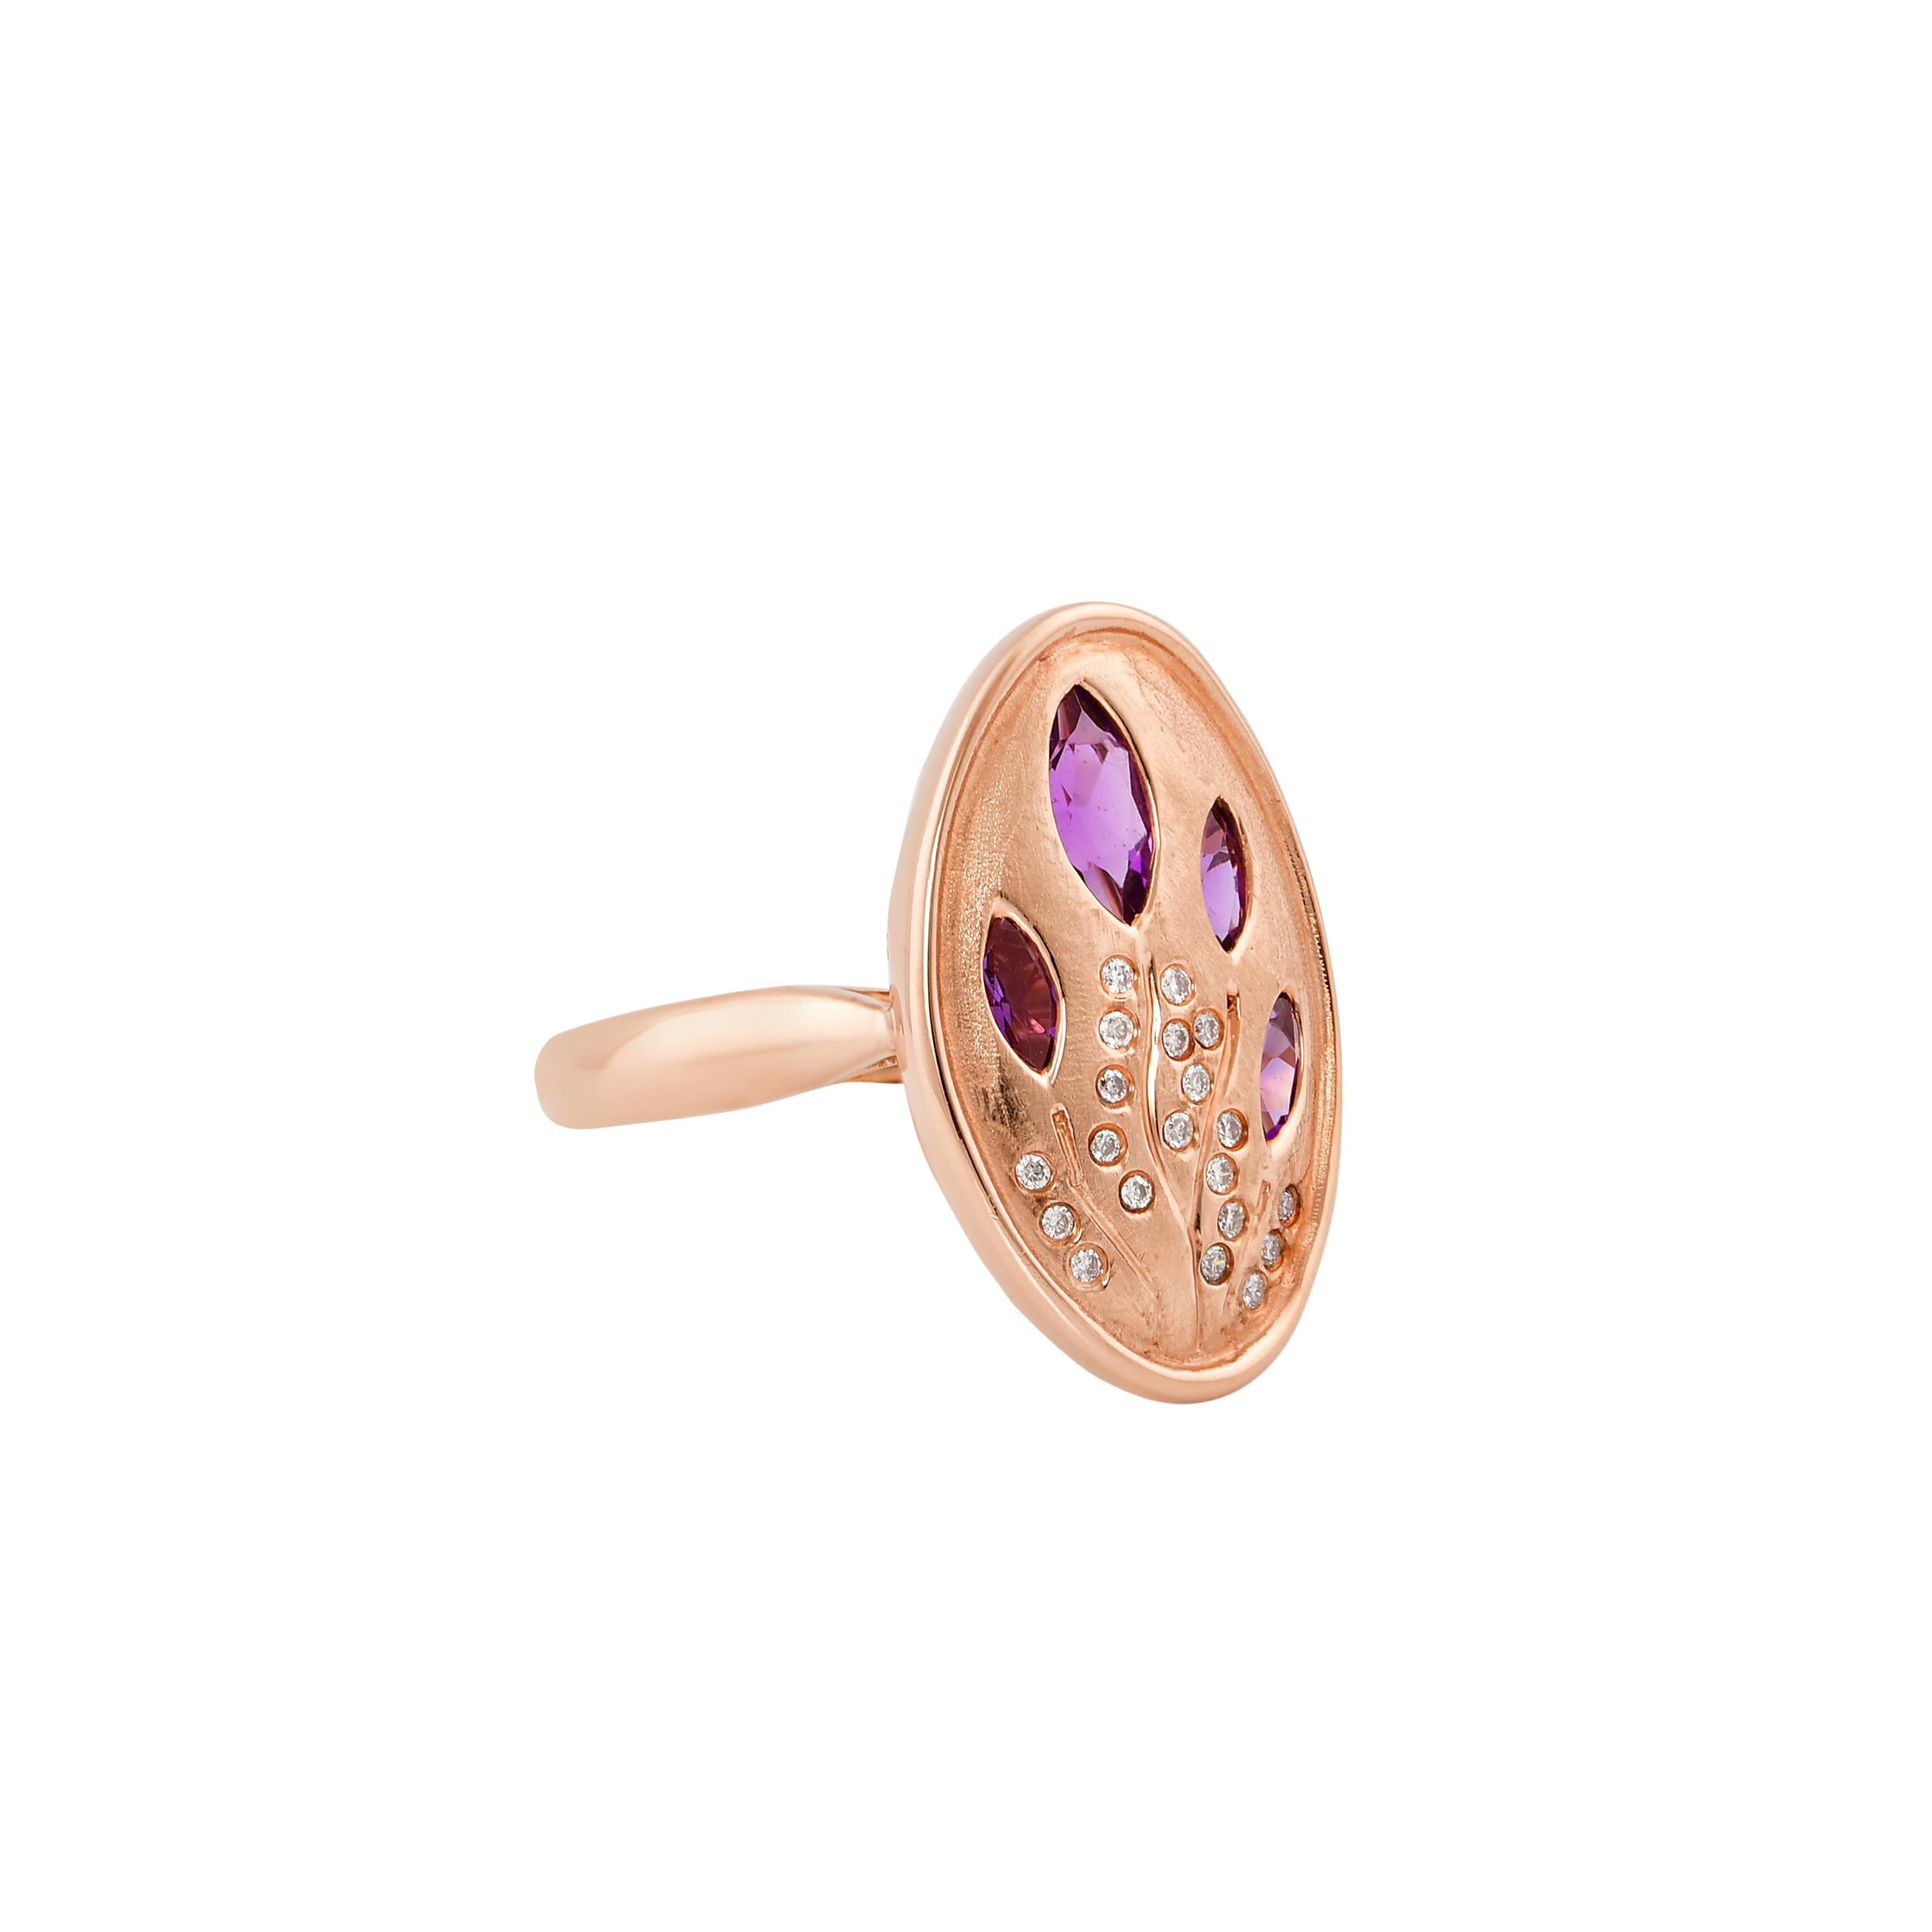 Marquise Cut 1.0 Carat Amethyst and Diamond Ring in 14 Karat Rose Gold For Sale